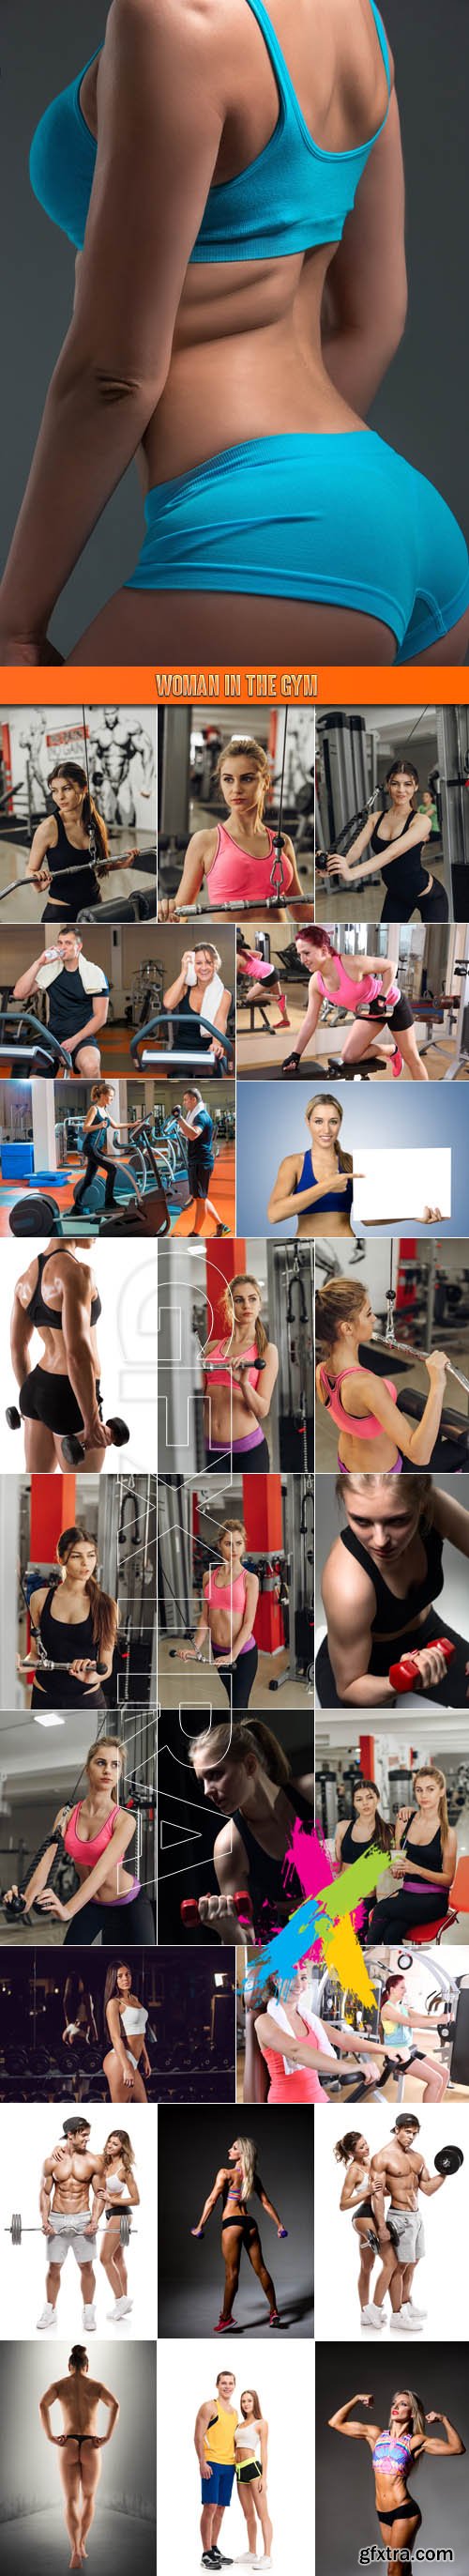 Woman in the gym - Stock Photos